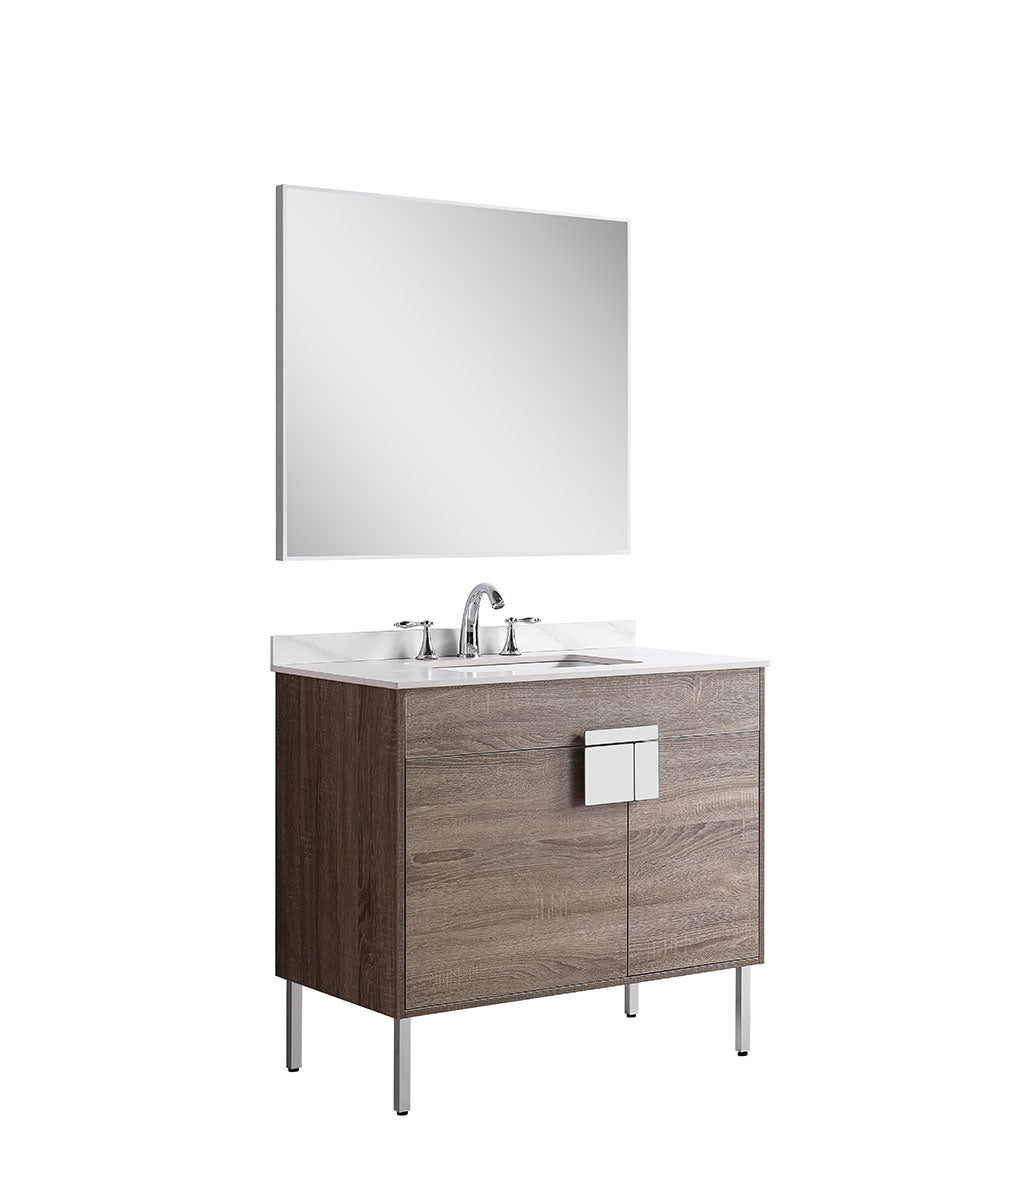 36" Vanity with Sintered Stone Countertop (Sonoma Oak）V9003 Series - iStyle Bath